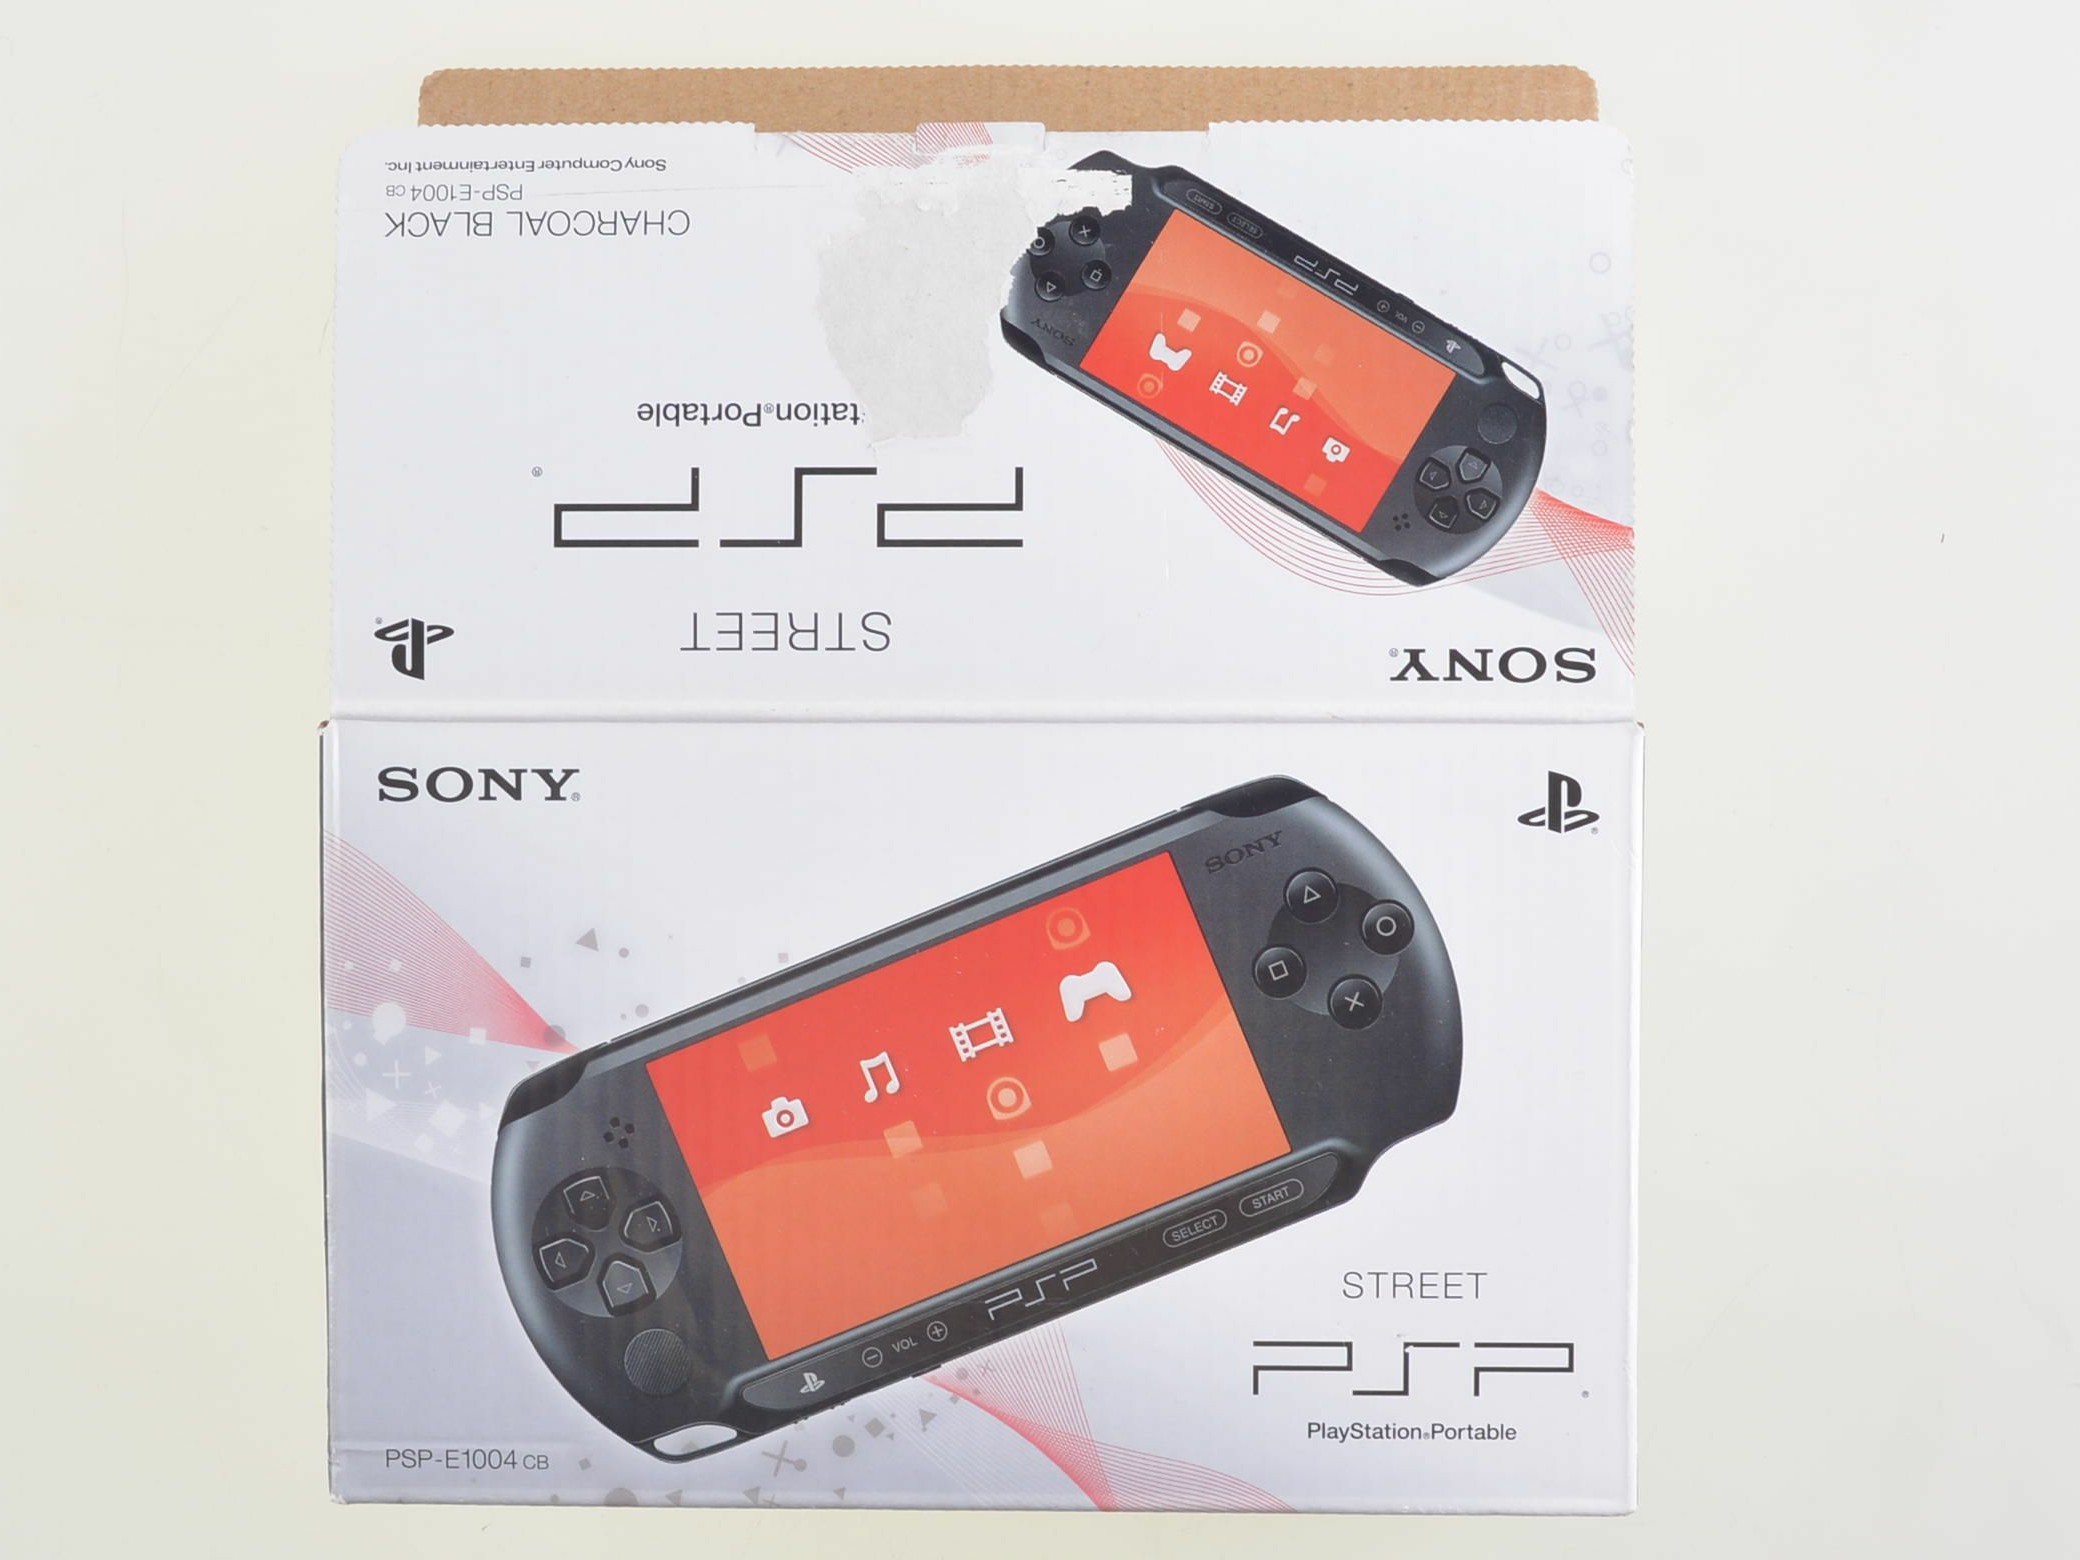 Playstation Portable Street PSP E1004 [Complete] - Playstation Portable Hardware